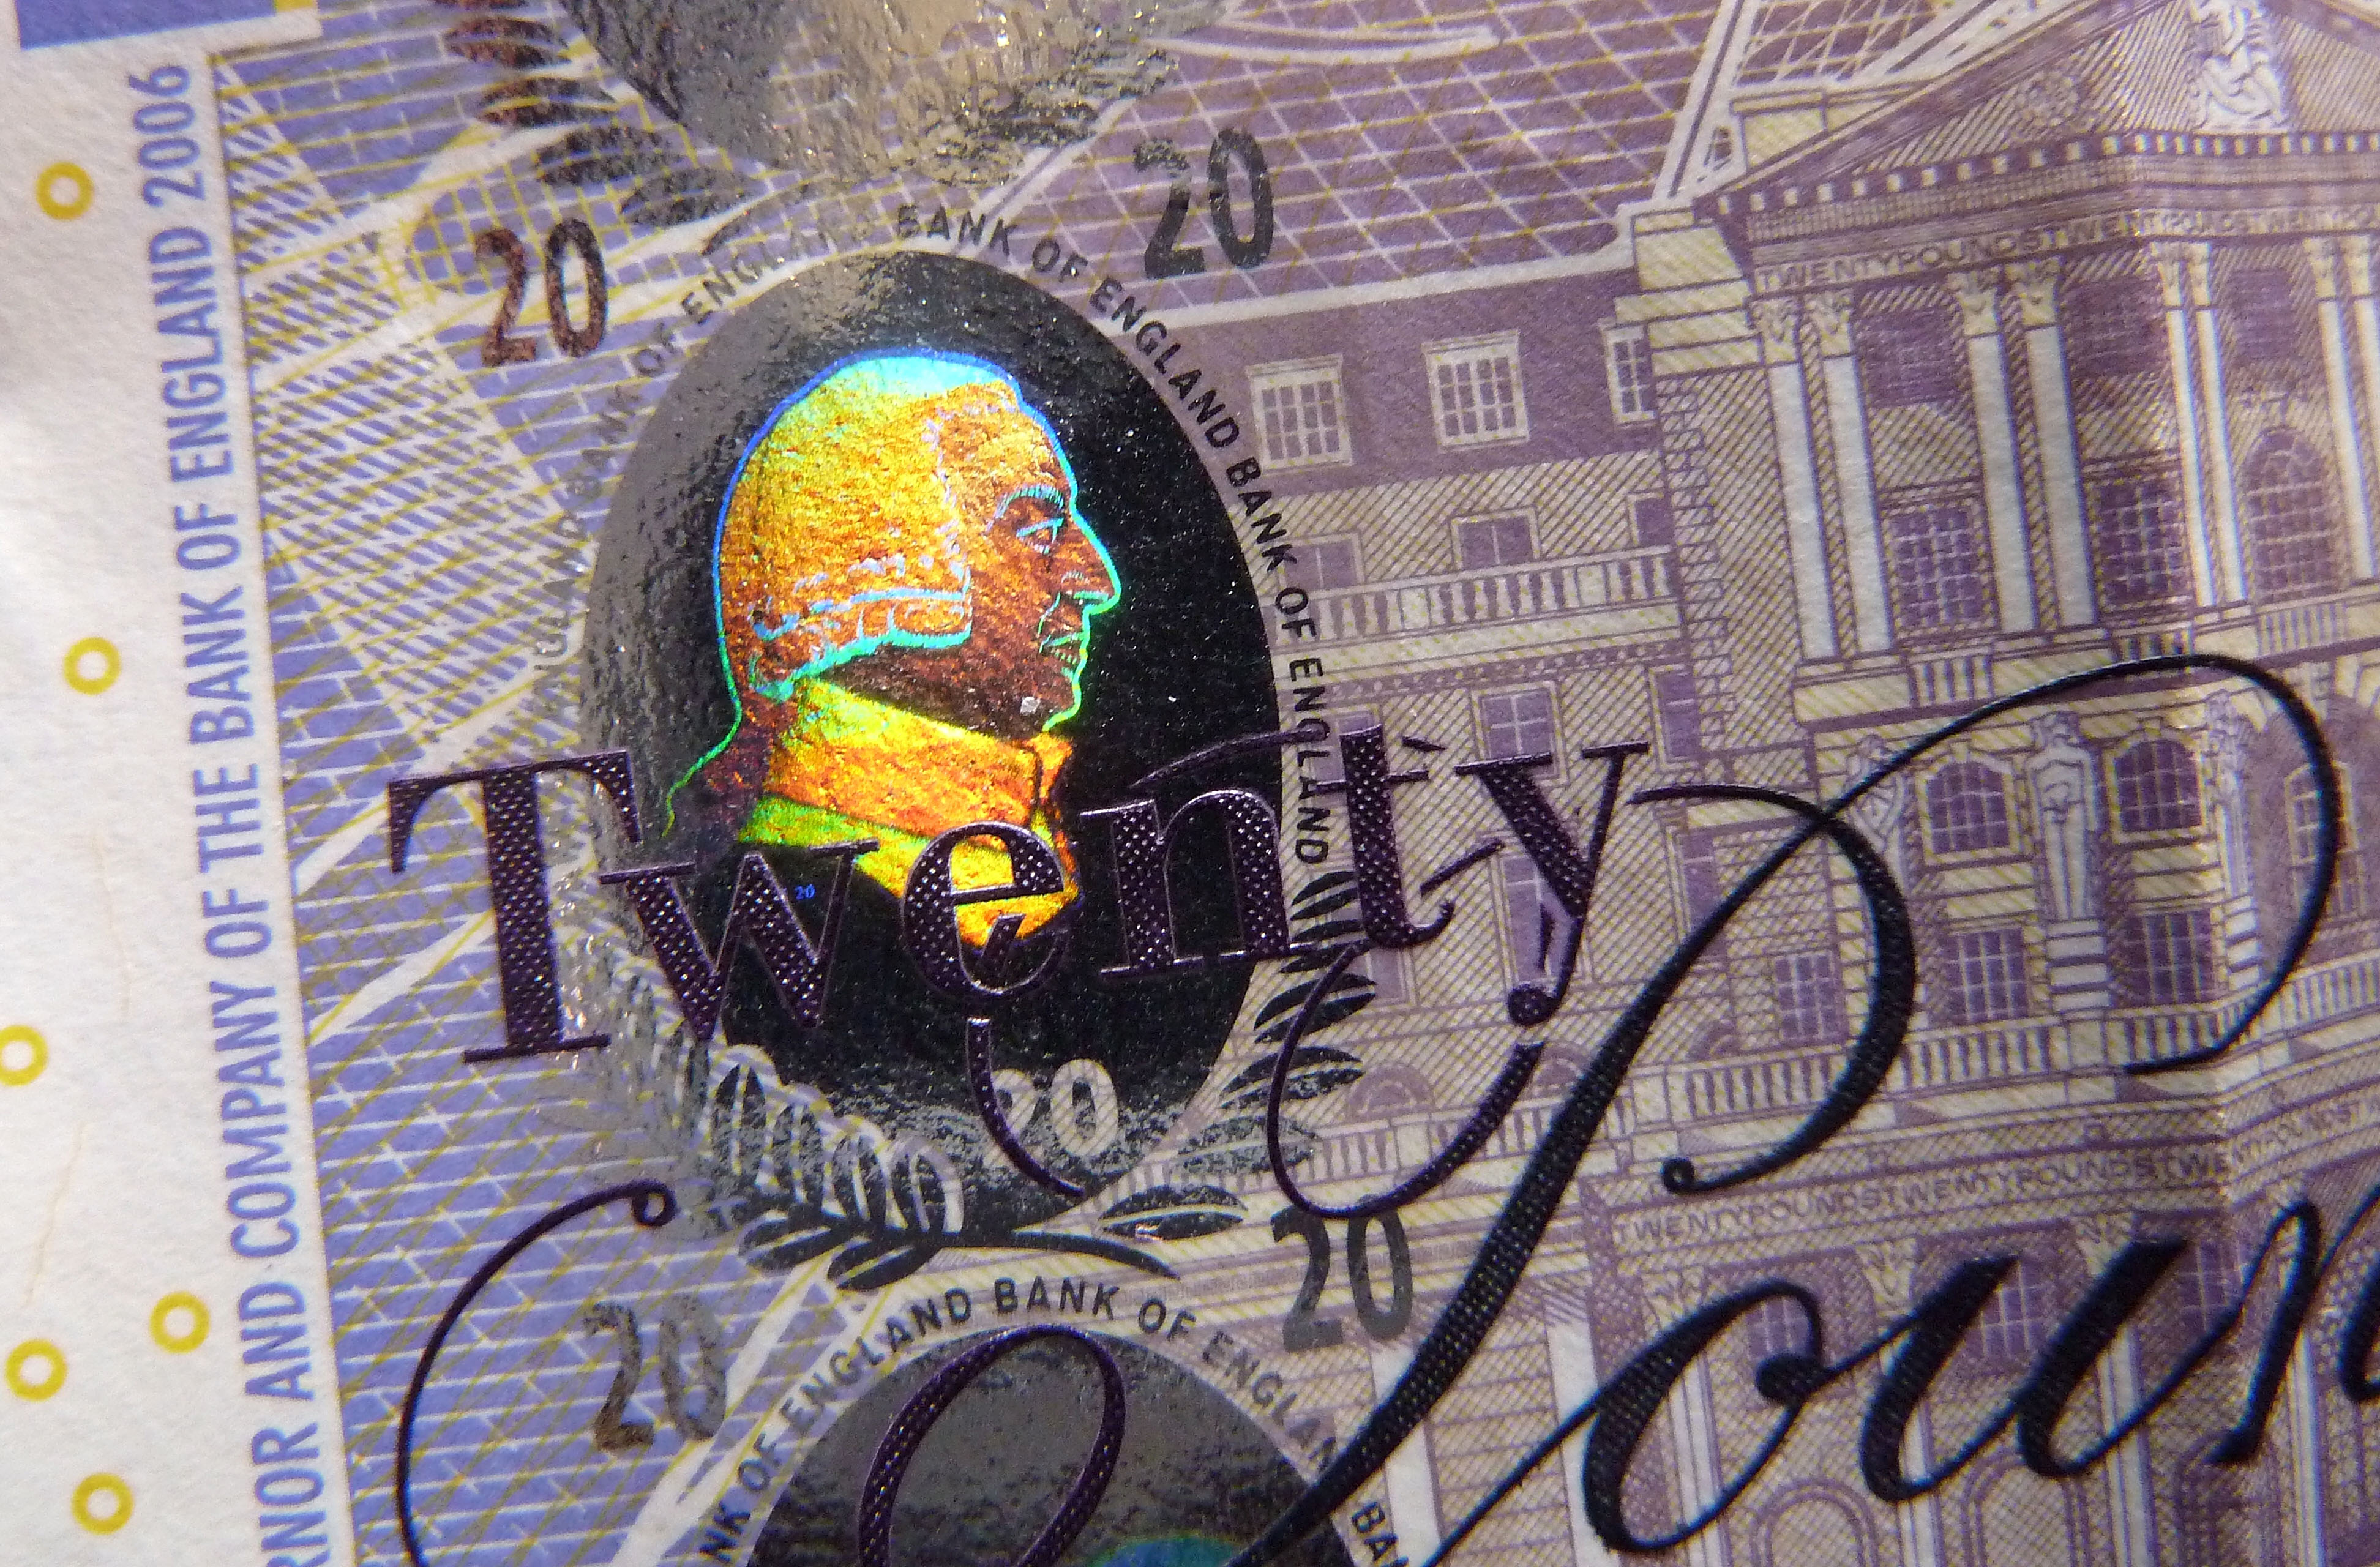 LONDON, ENGLAND - FEBRUARY 24:  A detail of the holographic foiling on a £20 banknote, featuring a profile of the economist Adam Smith, on February 24, 2016 in London, England. The next range of banknotes will be printed on polymer. The new £5 note will be issued in September 2016 and will feature Sir Winston Churchill, the £10 note will be issued in 2017 and the £20 note by 2020.  (Photo by Jim Dyson/Getty Images)